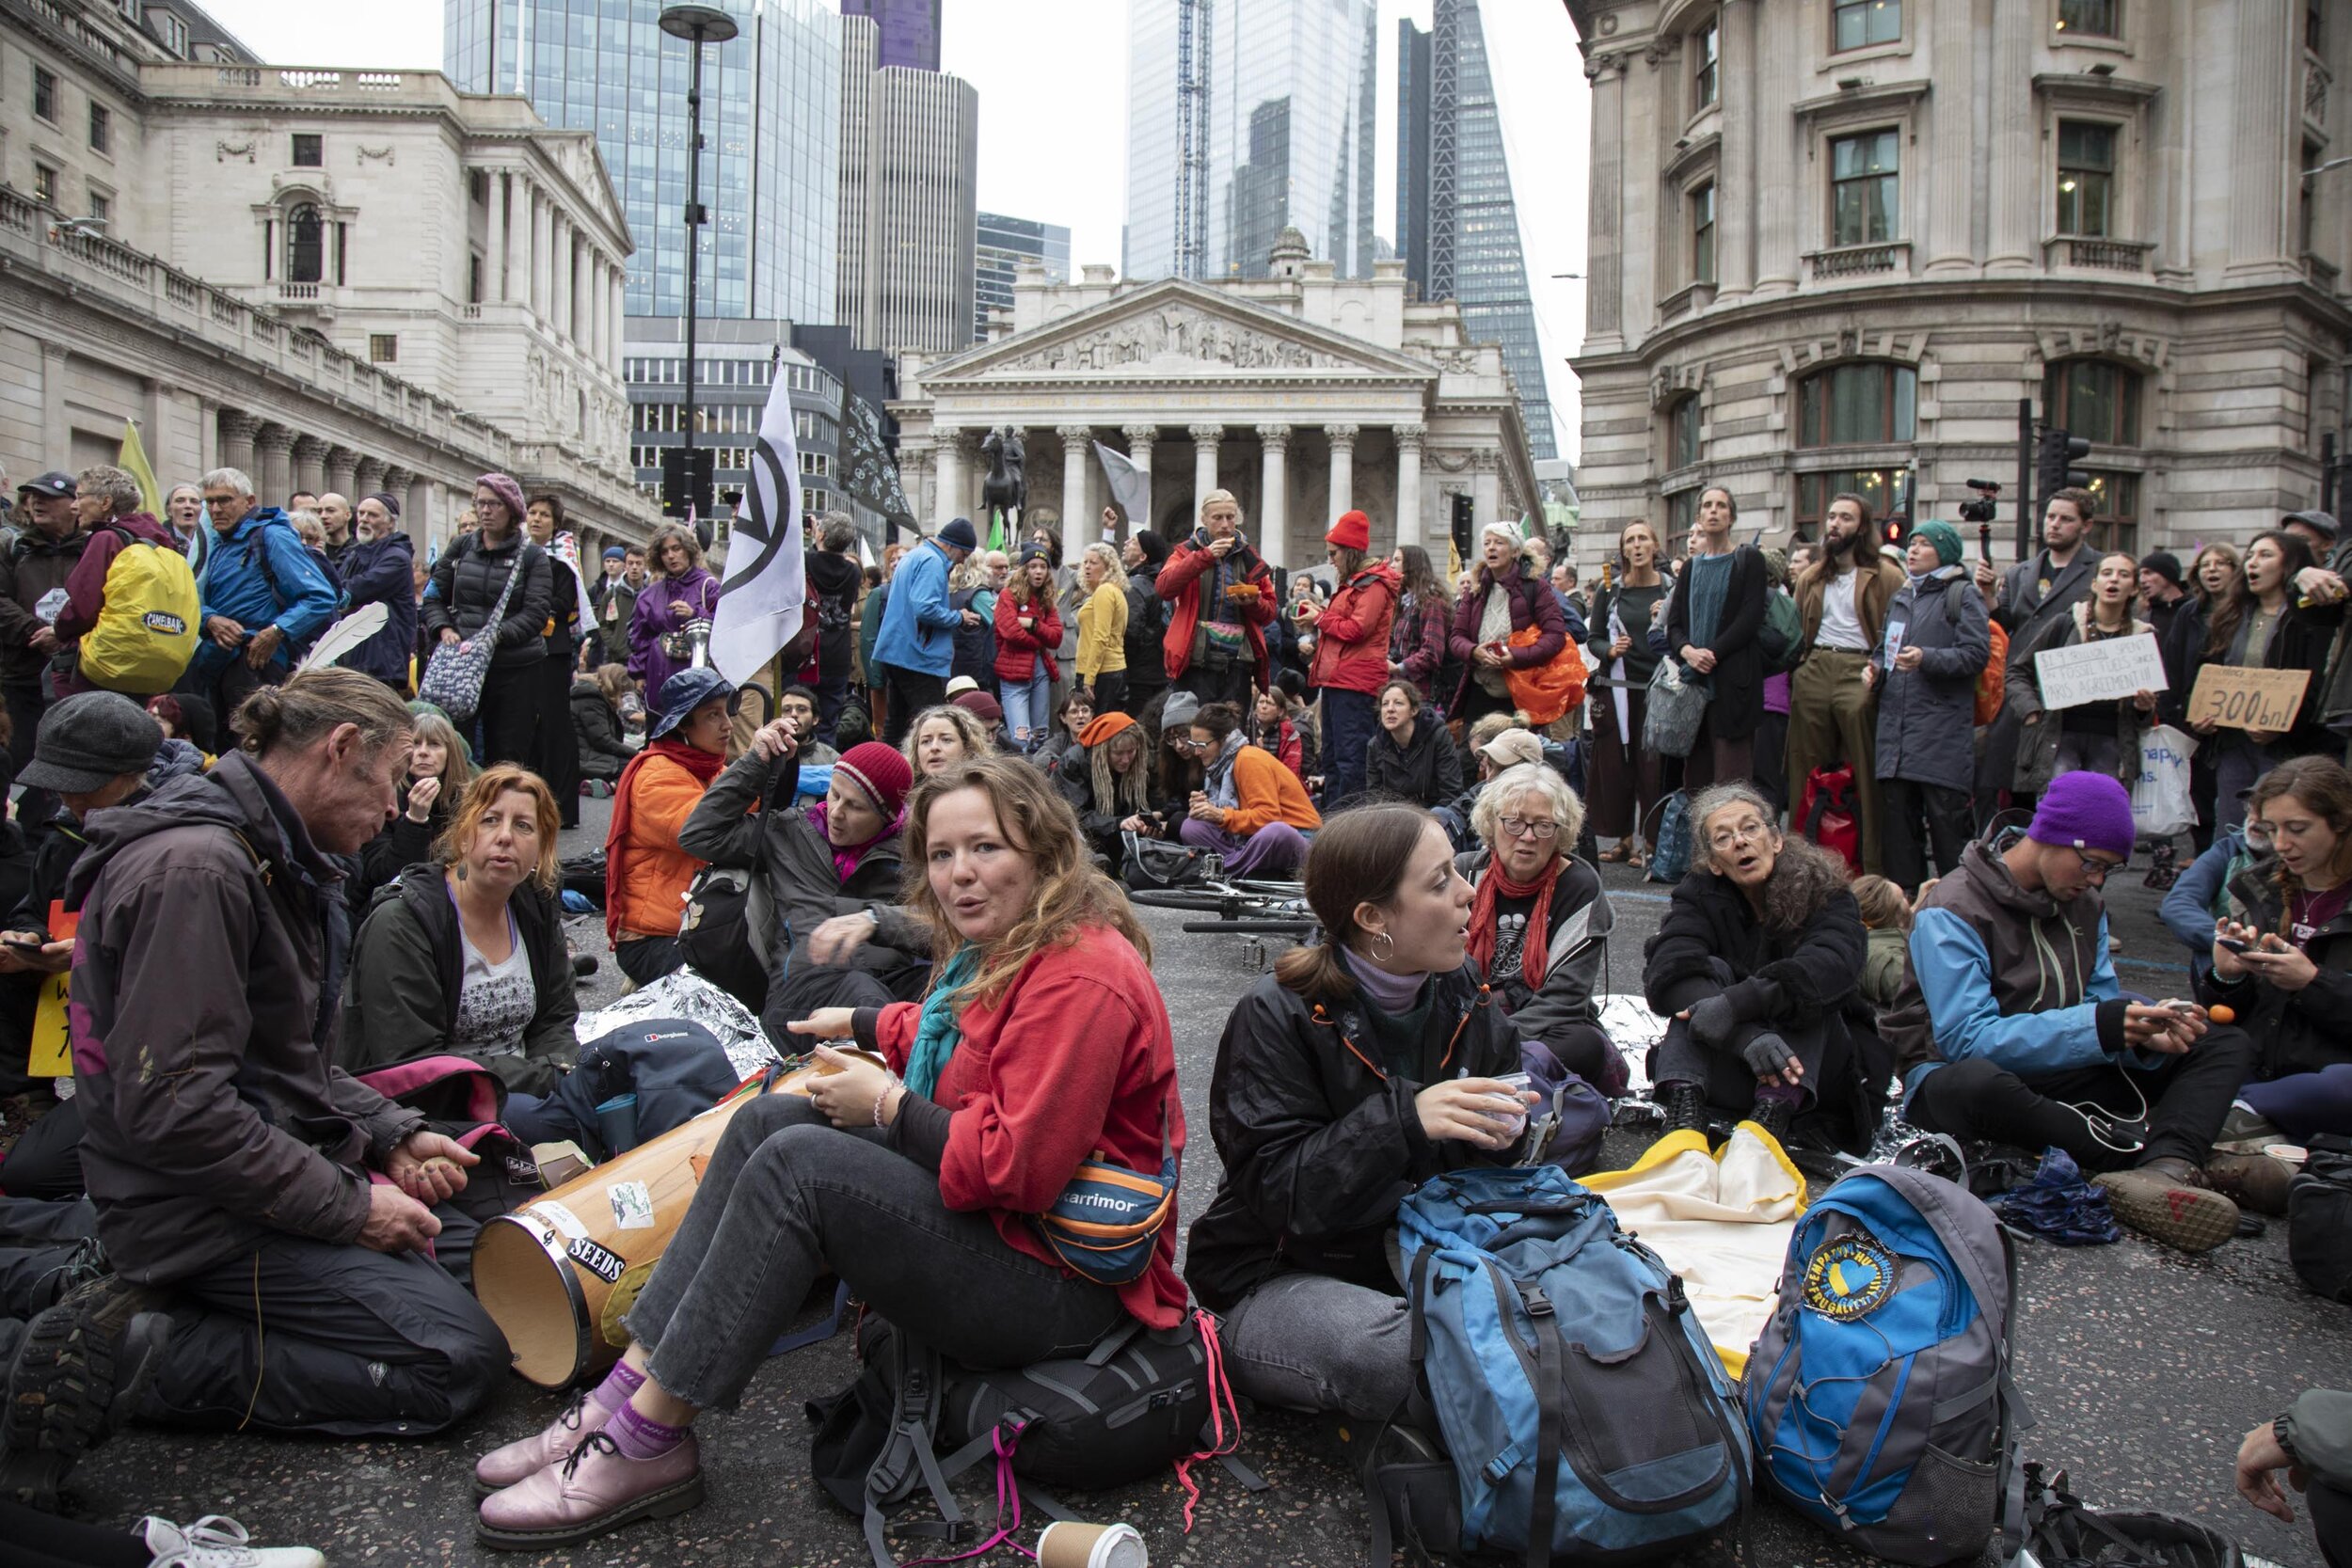  Climate change activists from Extinction Rebellion block the streets at Bank in the heart of the City of London financial district. 